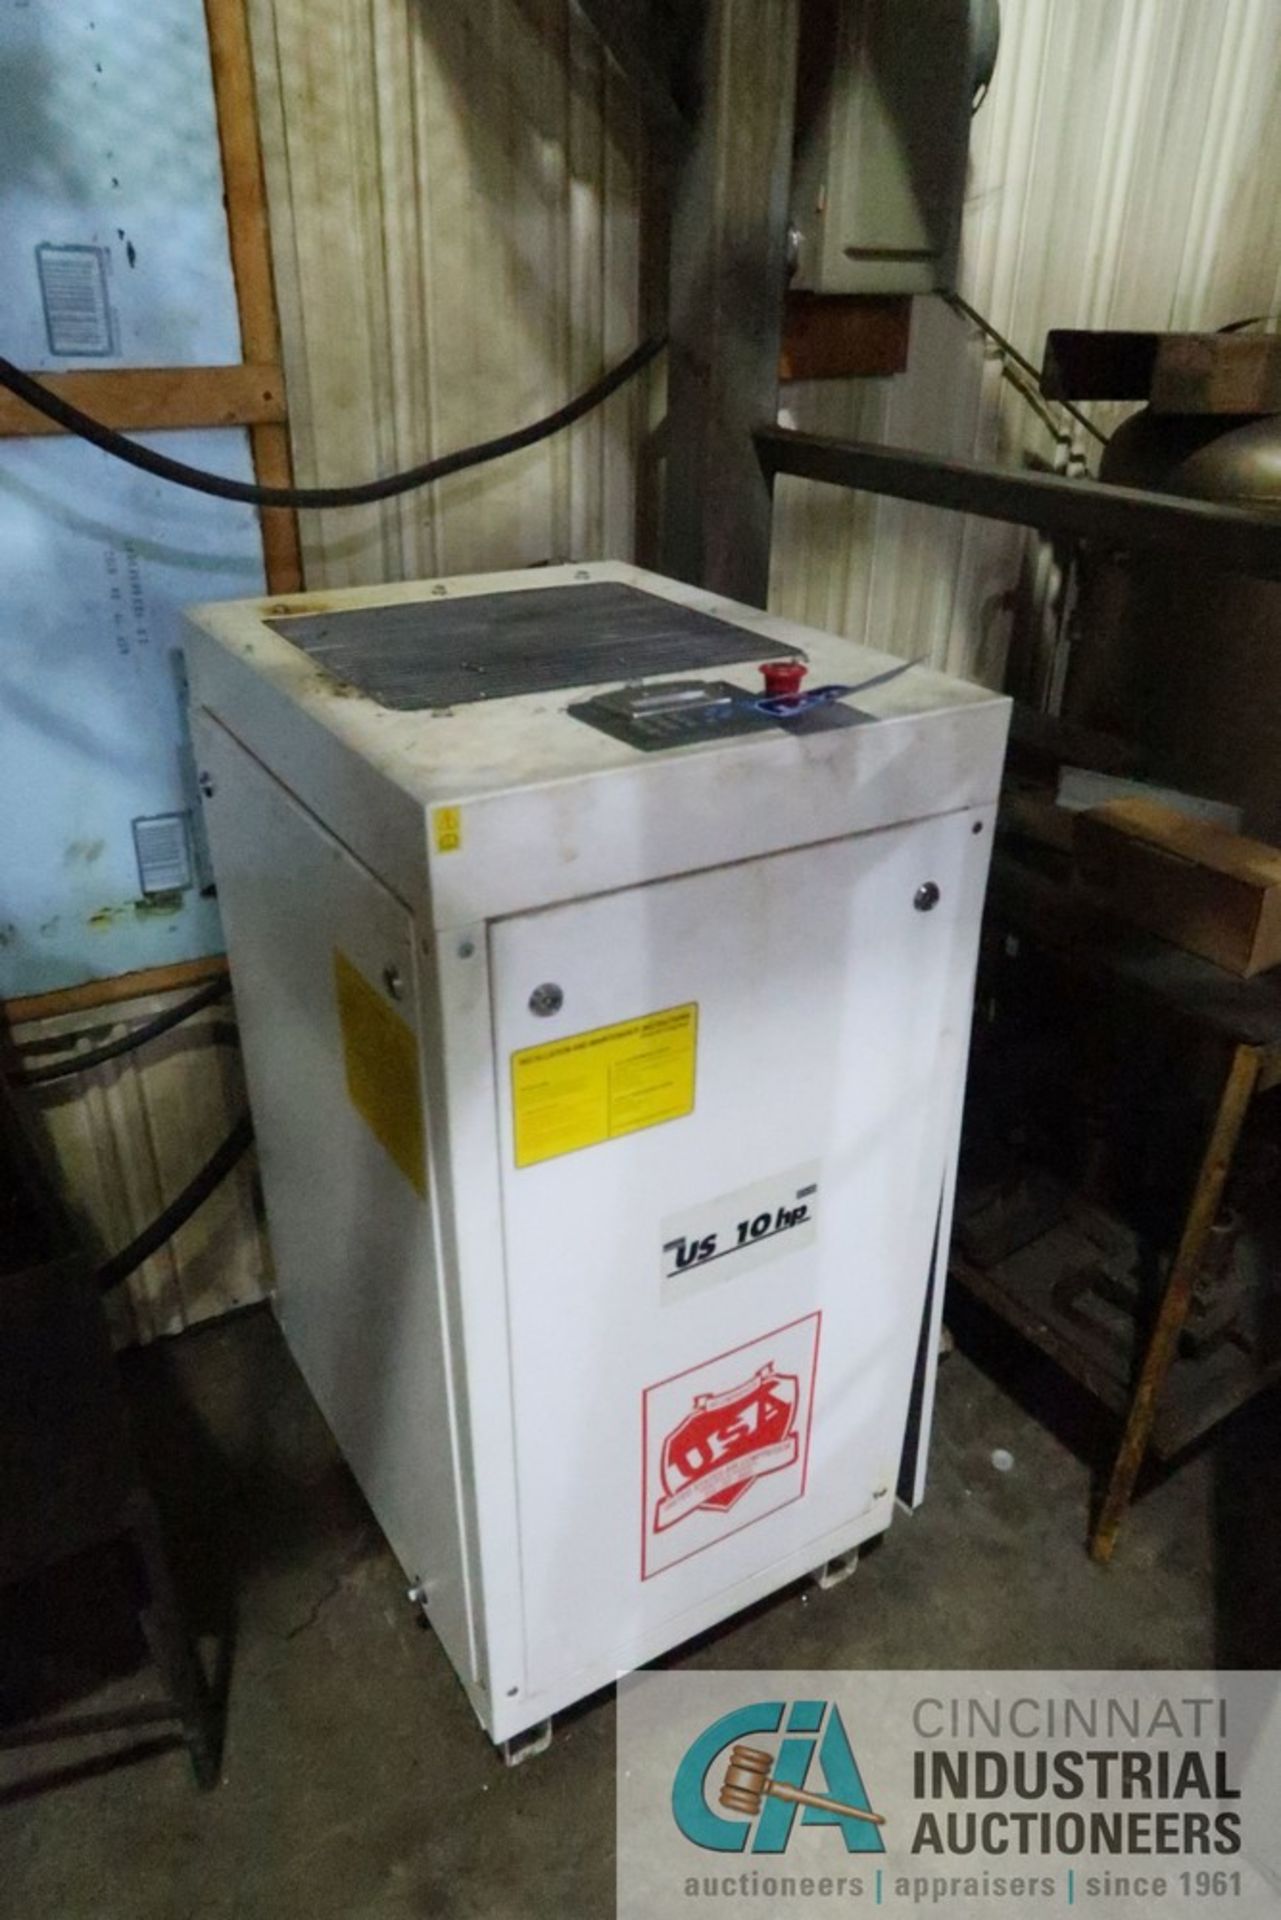 US AIR REFRIGERATED AIR DRYER - Image 2 of 4